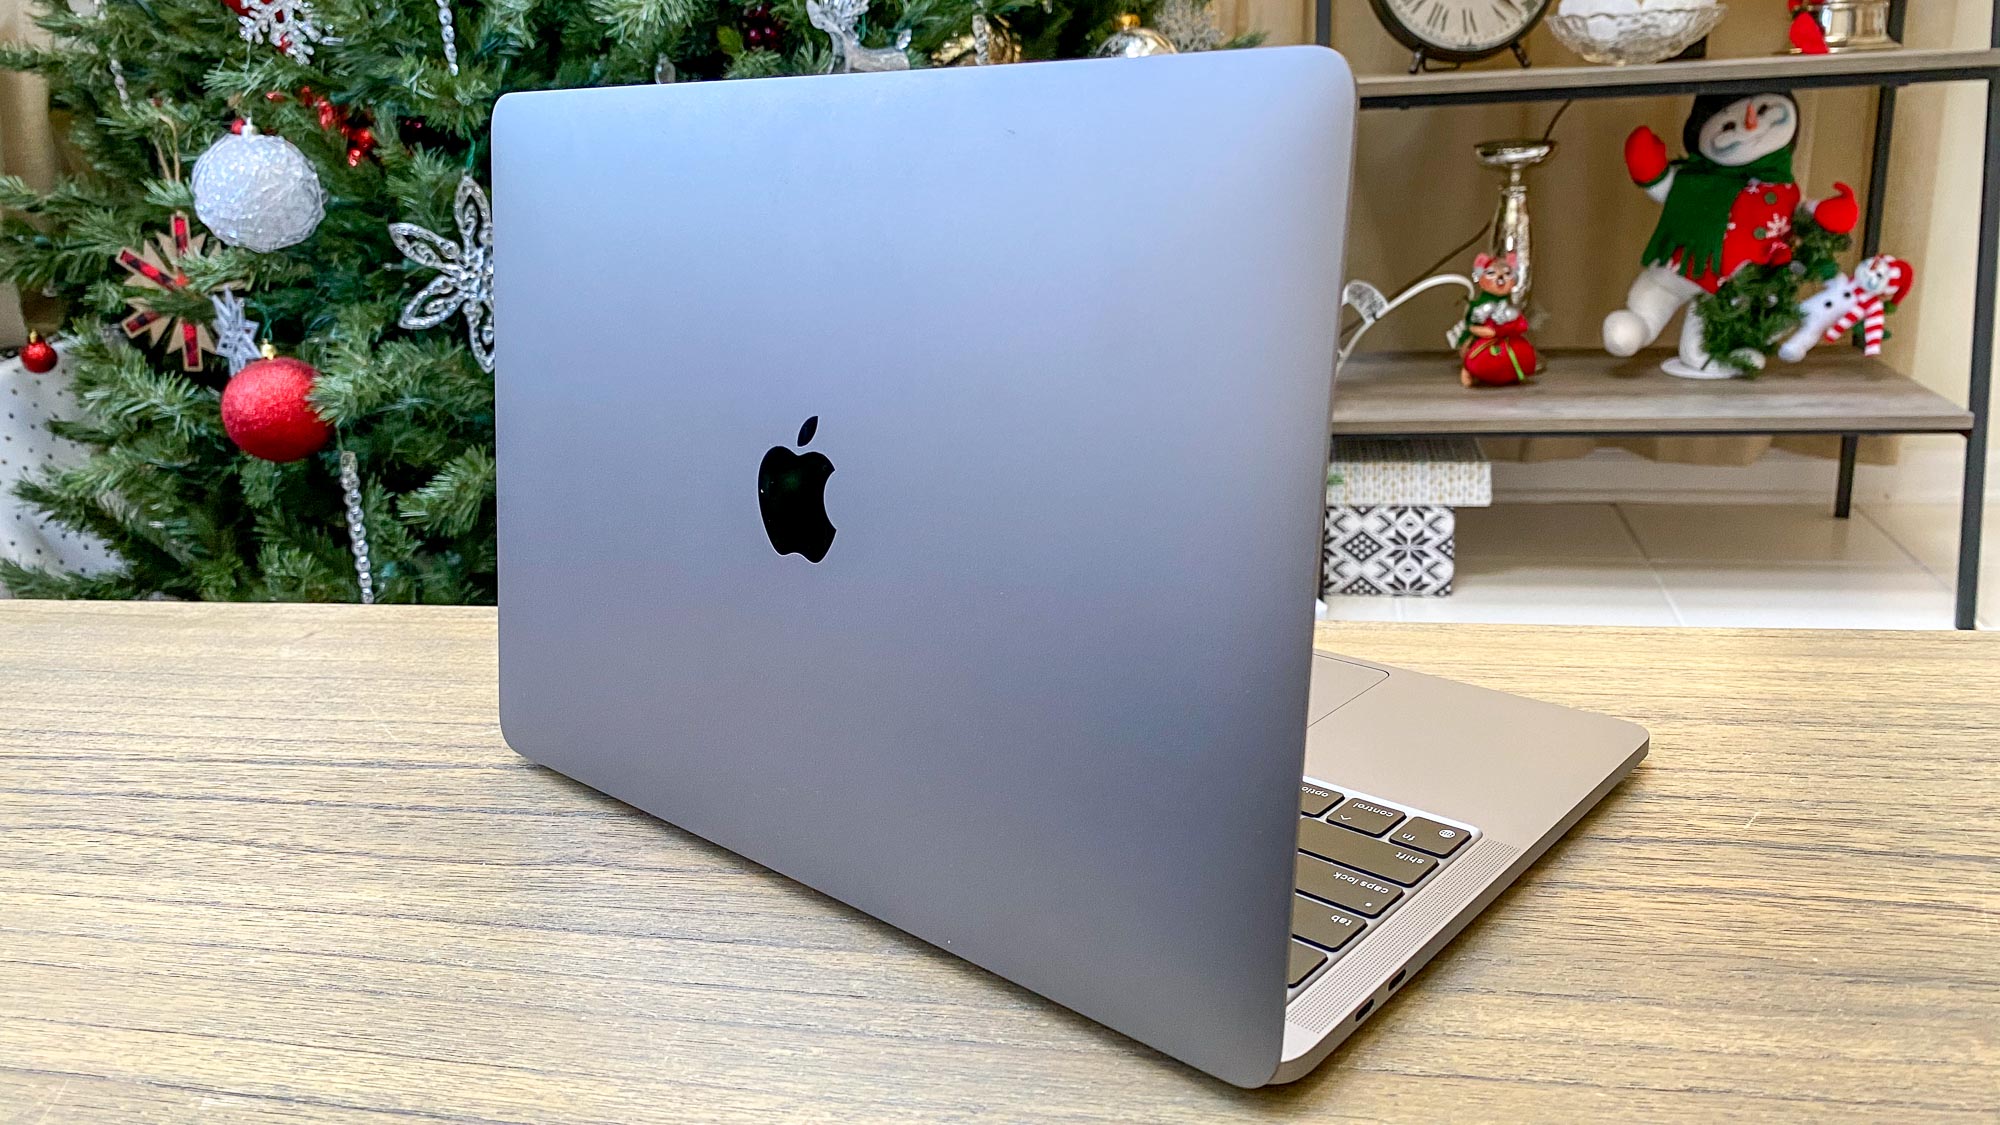 MacBook Pro 2021 — why I'm finally upgrading after 8 years